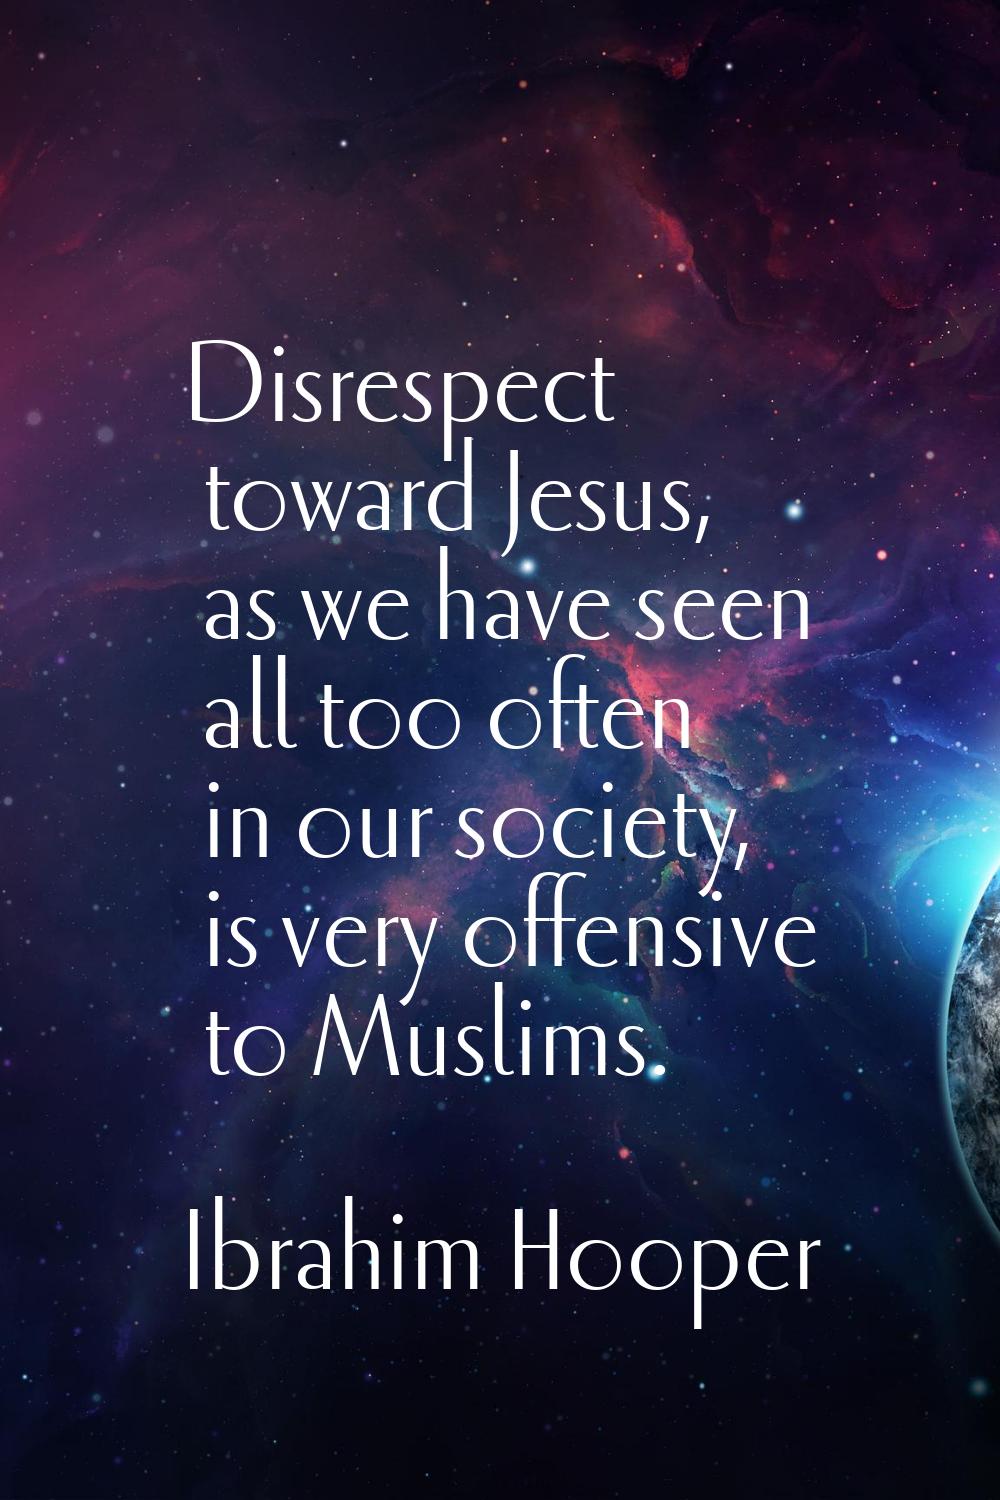 Disrespect toward Jesus, as we have seen all too often in our society, is very offensive to Muslims